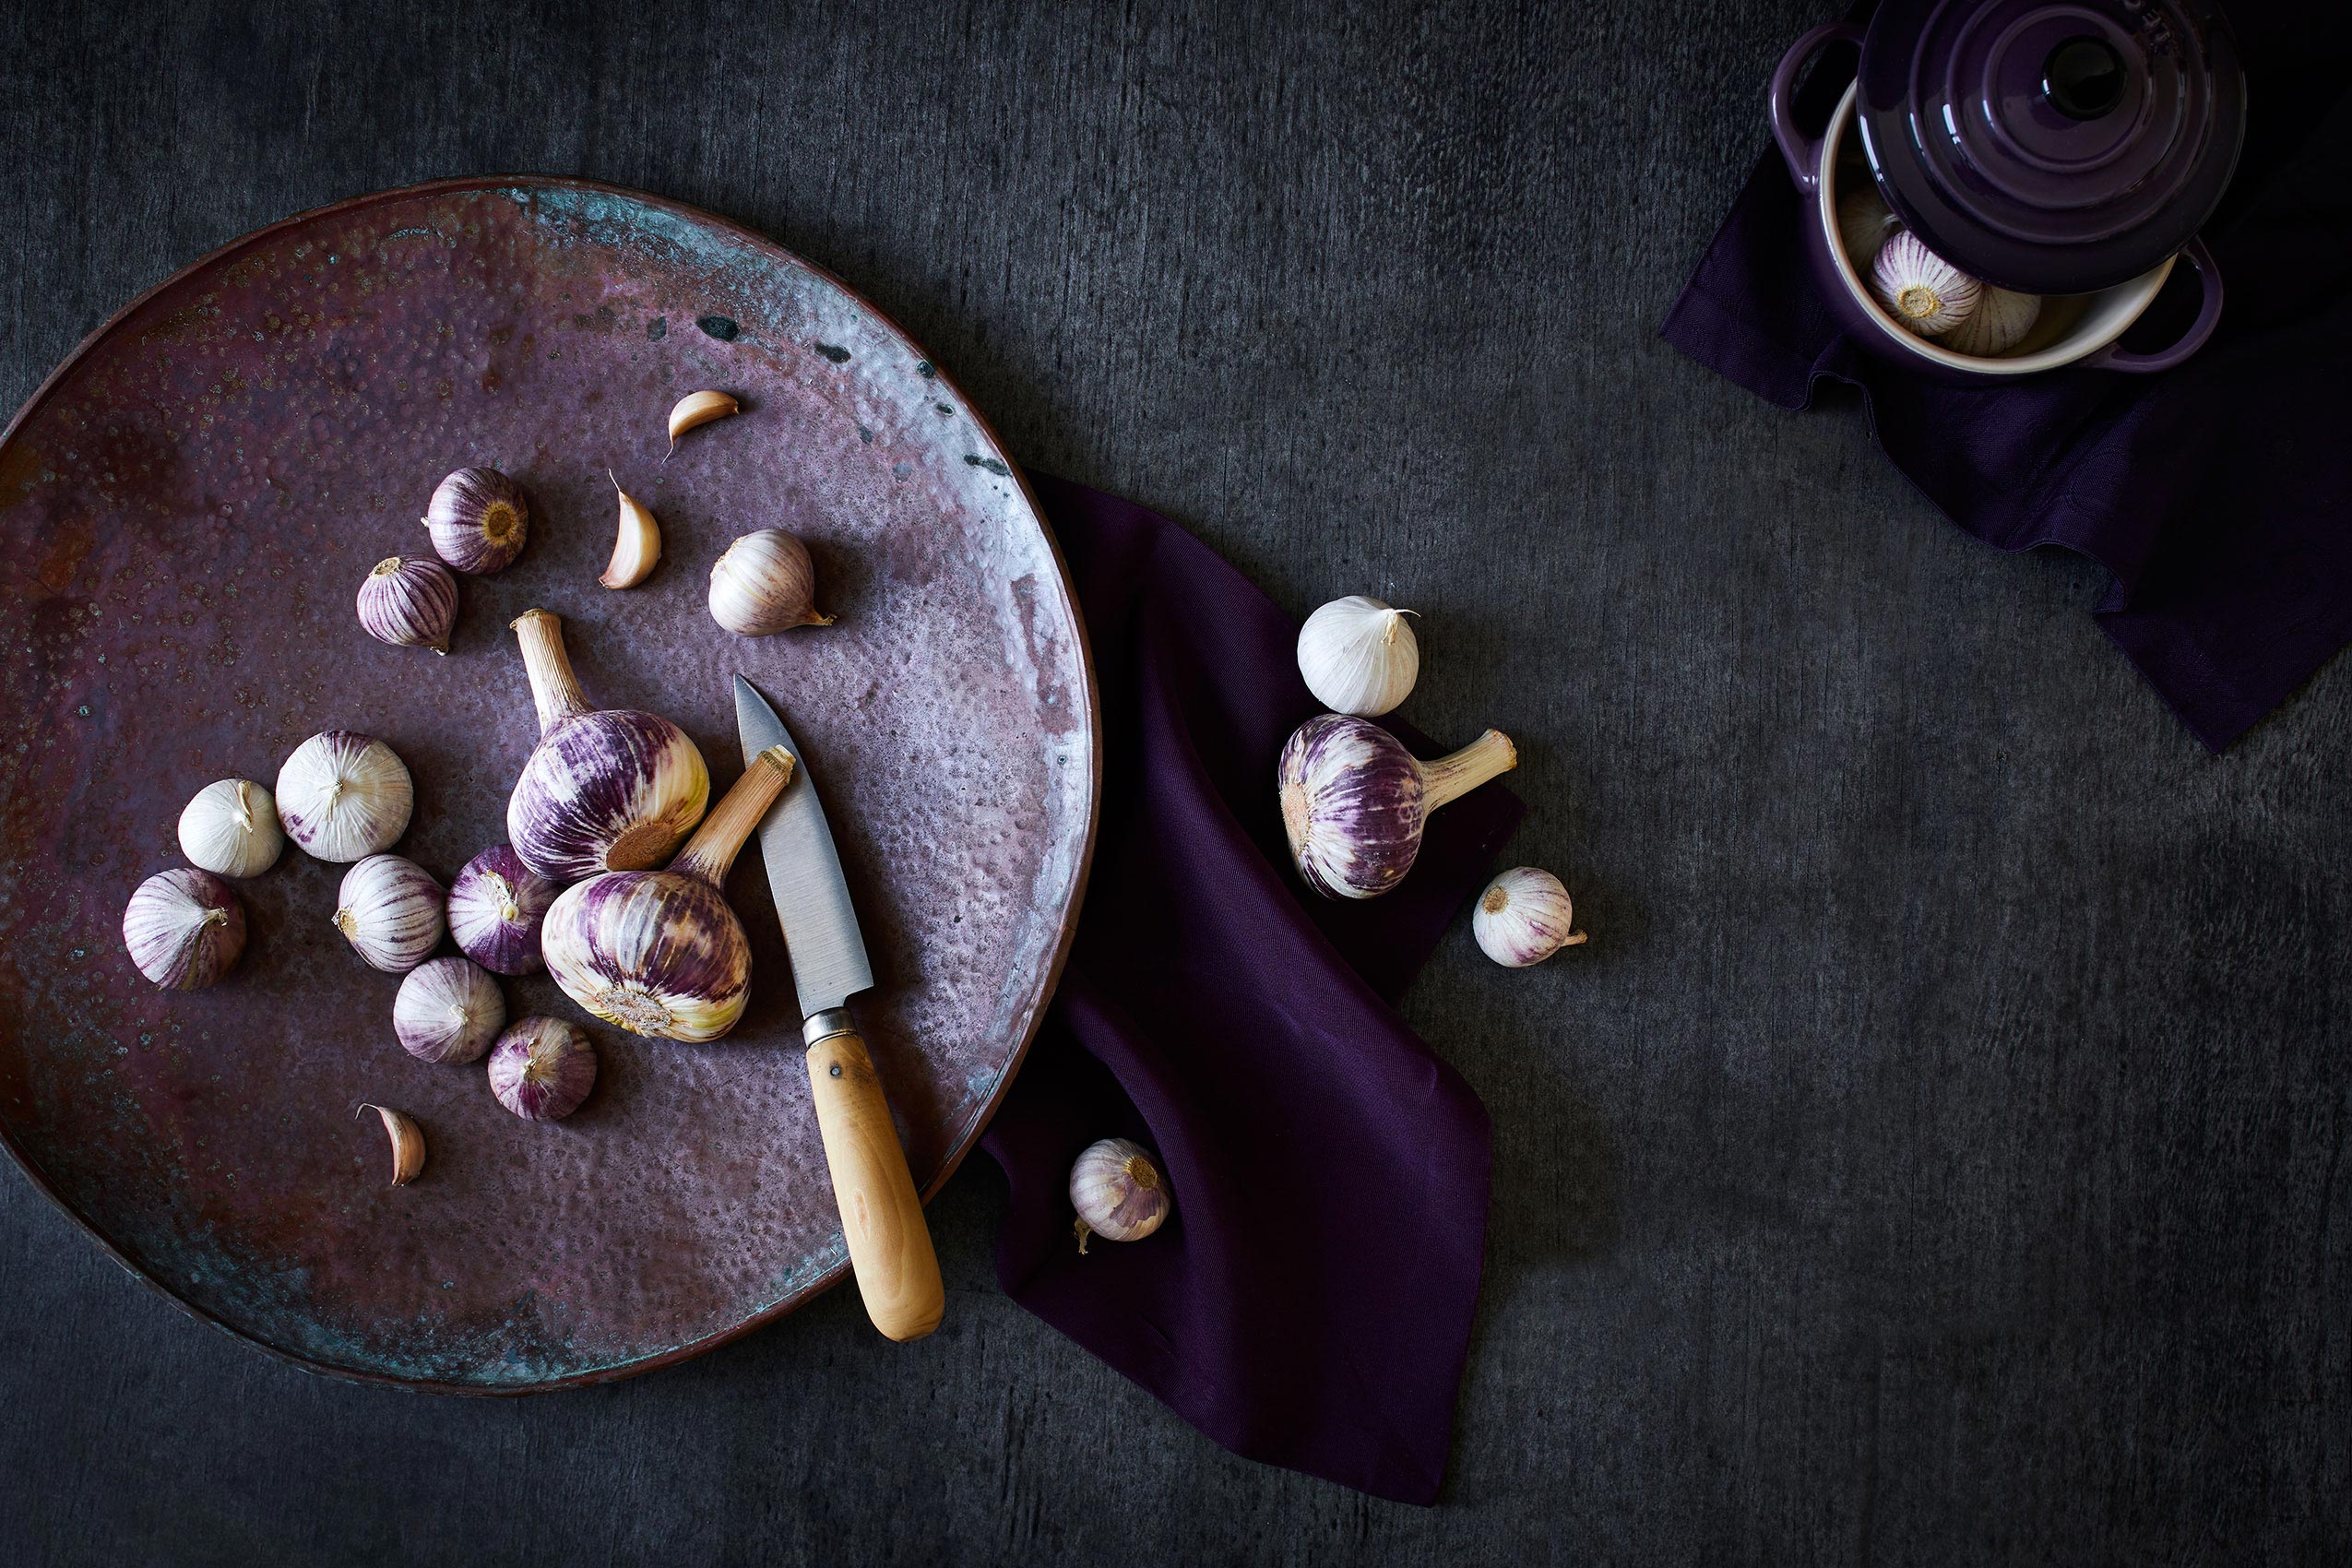 My Indian Kitchen • Purple Garlic & Paring Knife on Ceramic Plate • Cookbook & Editorial Food Photography